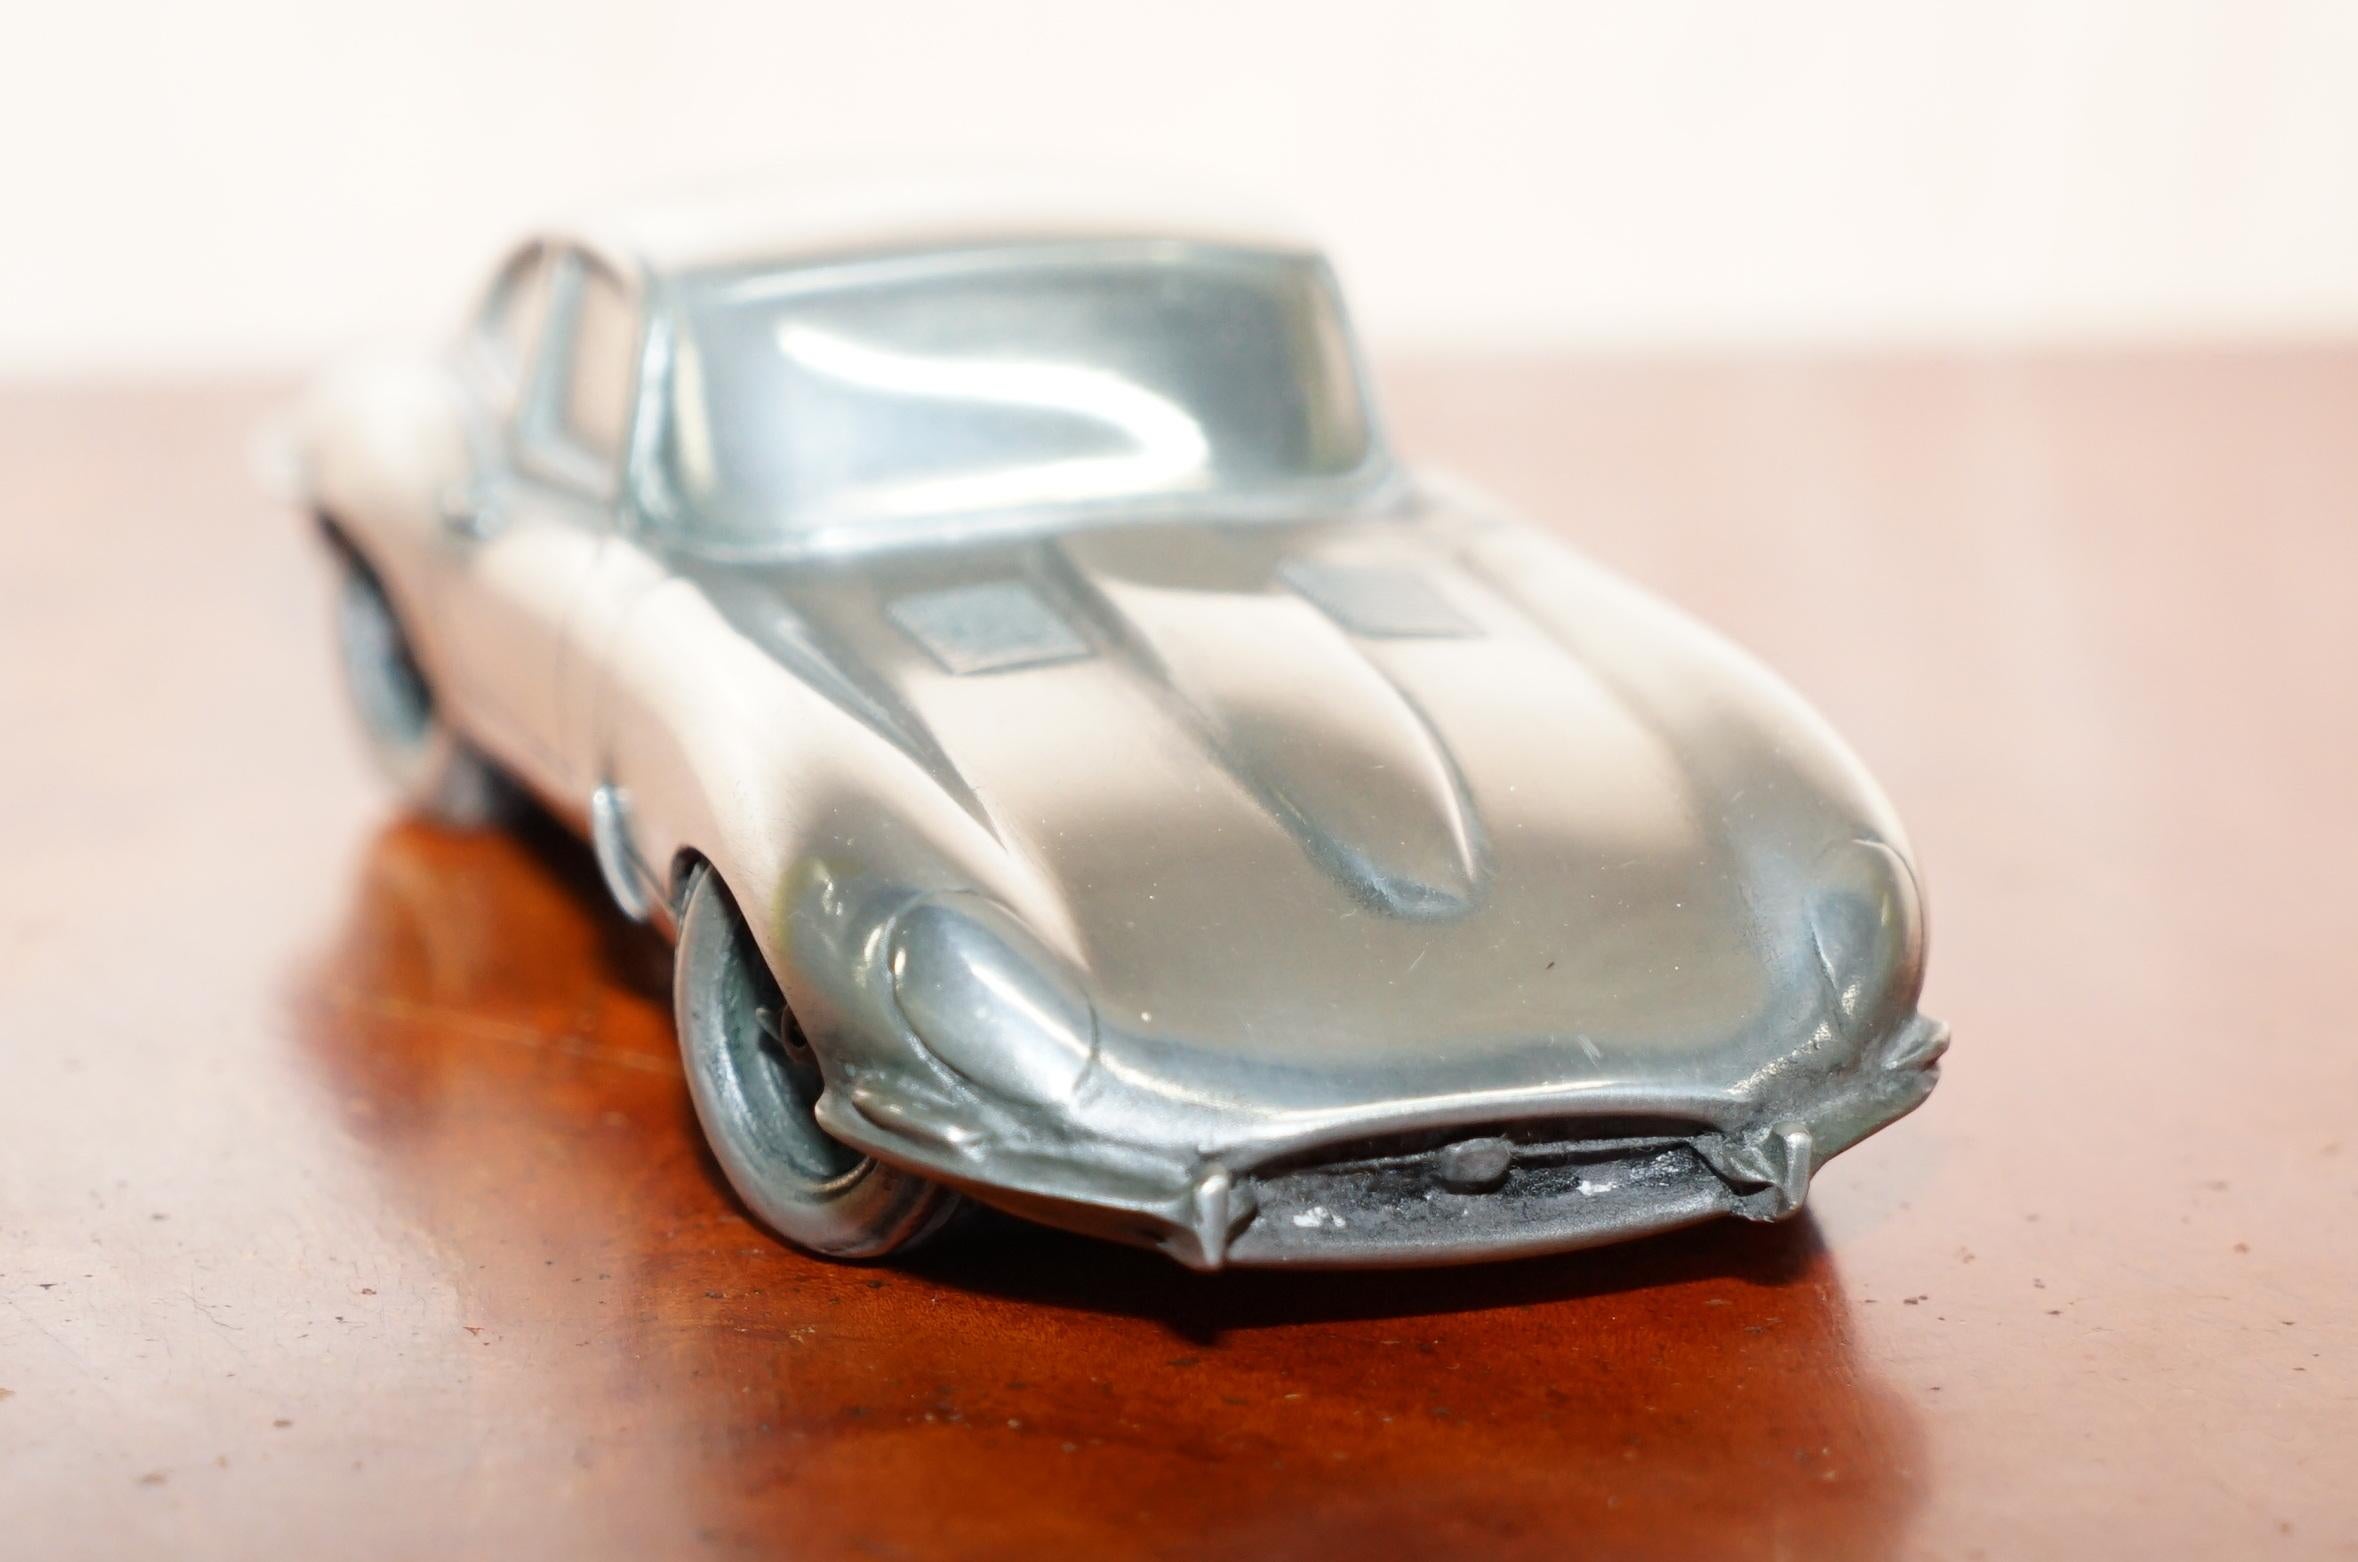 Hand-Crafted Medium Compulsion Gallery Pewter E-Type Jaguar Coup circa 1950s-1960s Car